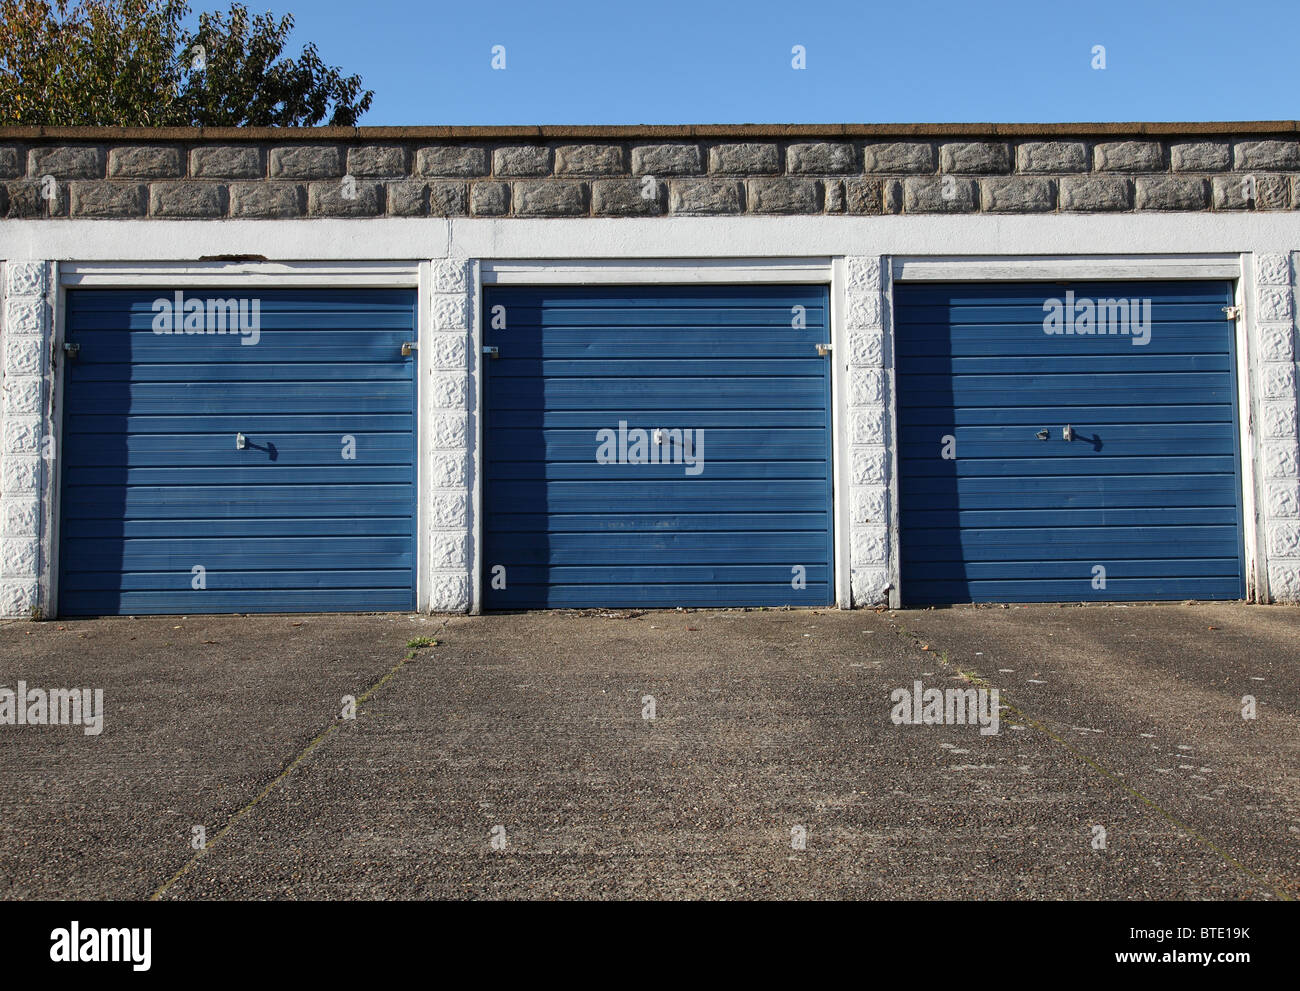 Secure local council residents garages in a U.K. city. Stock Photo